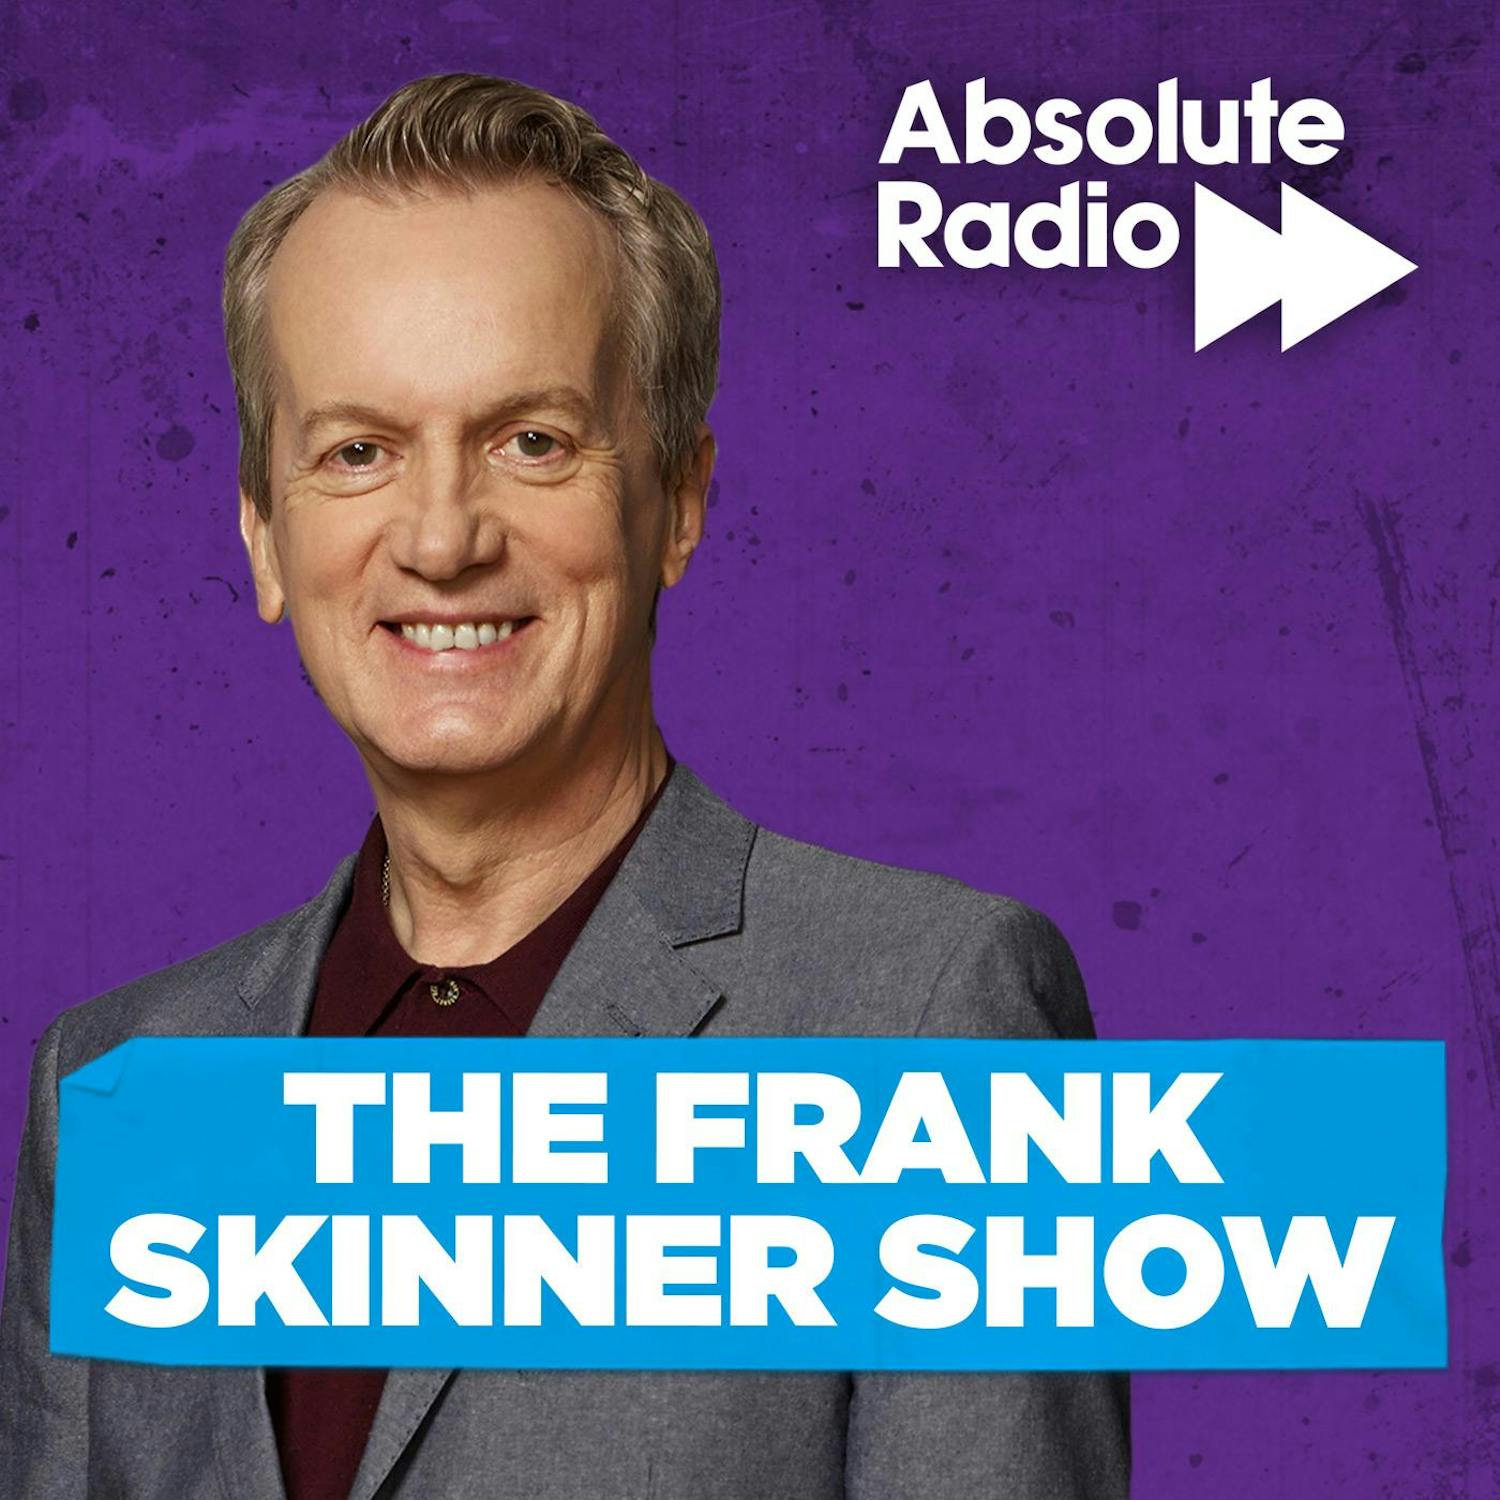 Frank Skinner in Conversation with Roger Daltrey